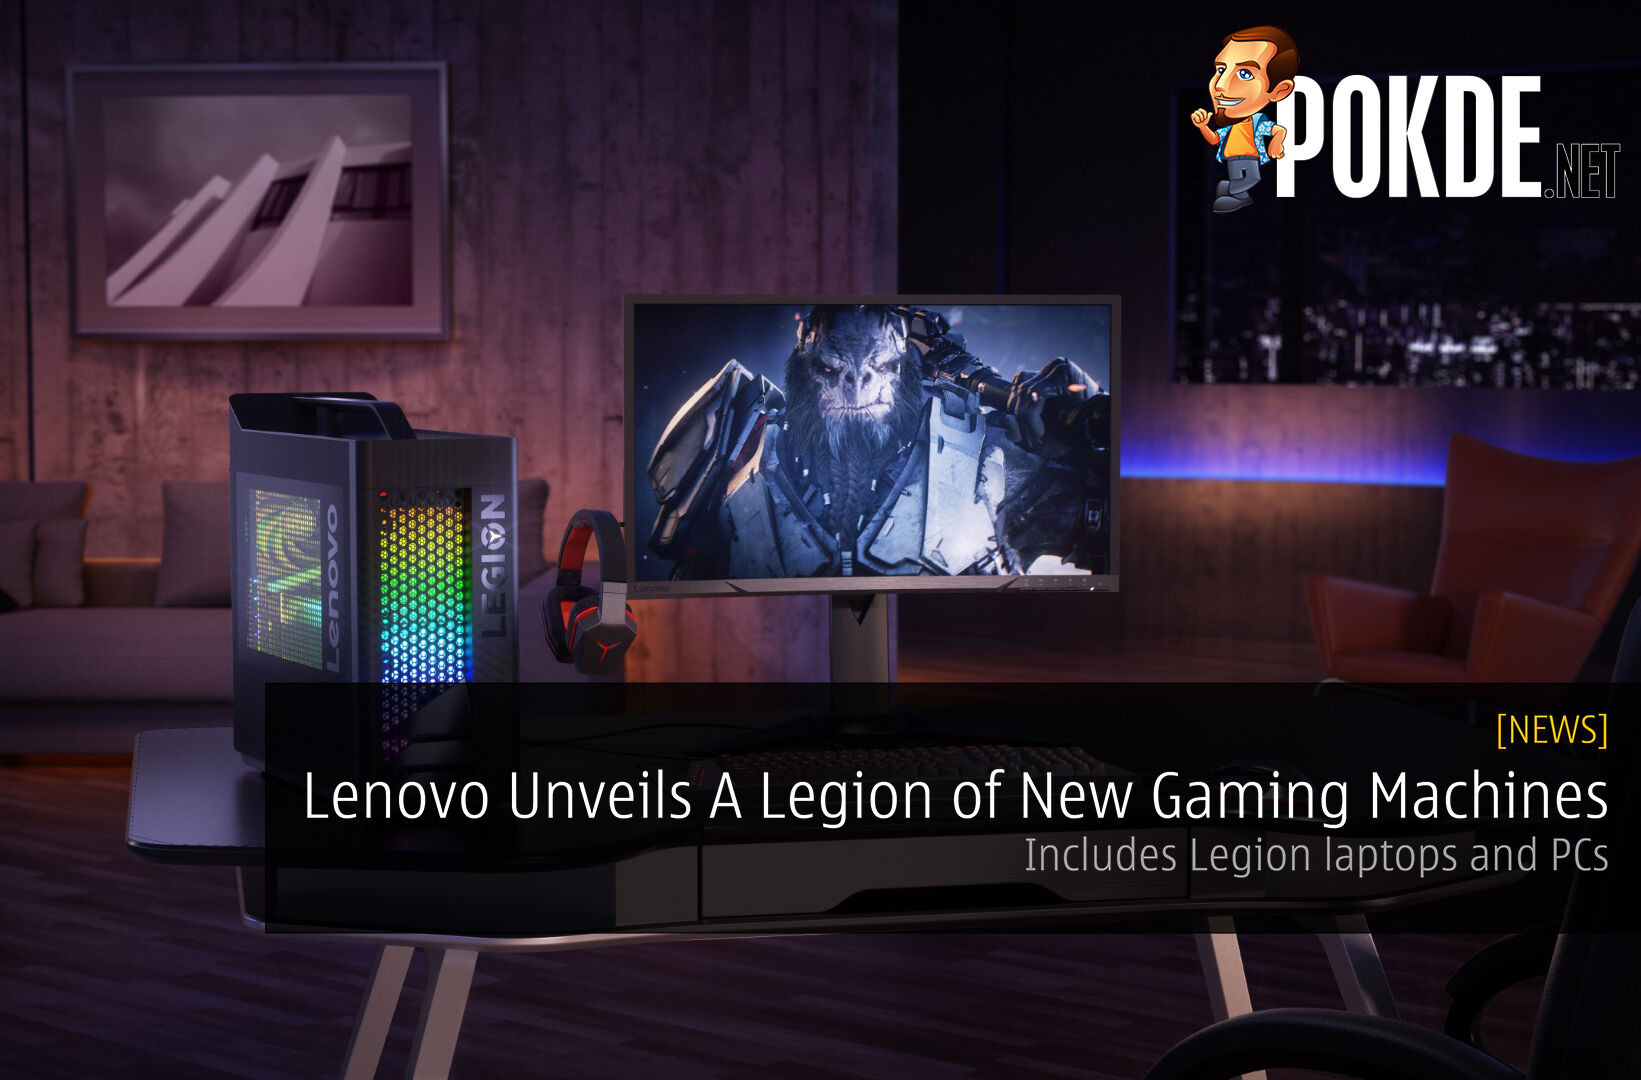 Lenovo Unveils A Legion of New Gaming Machines - Includes Legion laptops and PCs 32